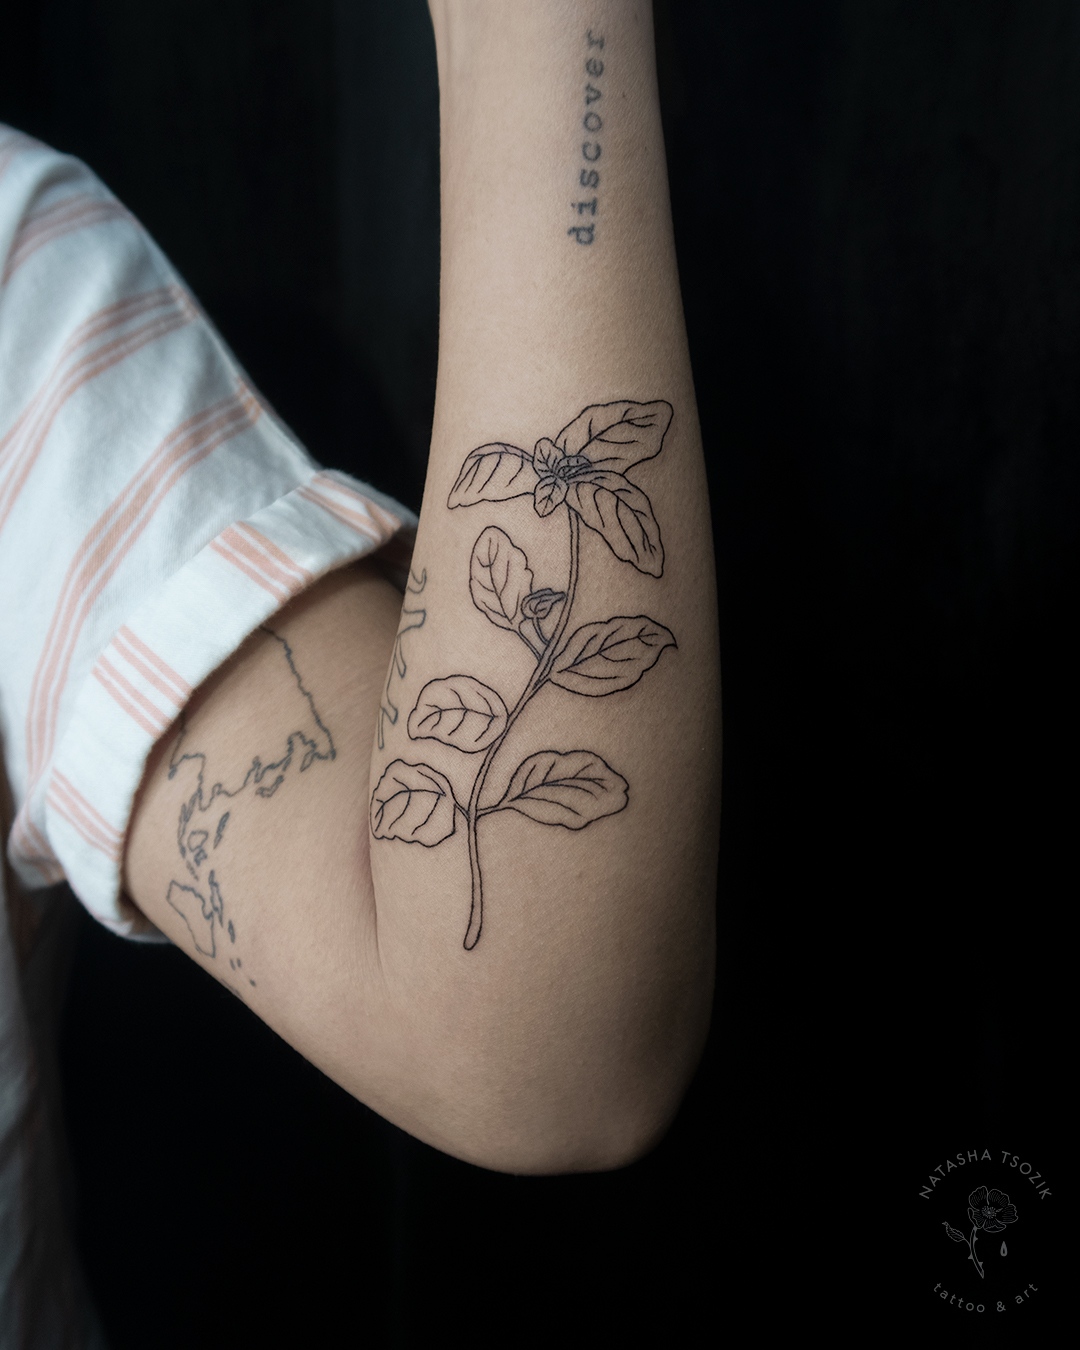 A botanical fine line tattoo on a forearm picturing basil leaves.